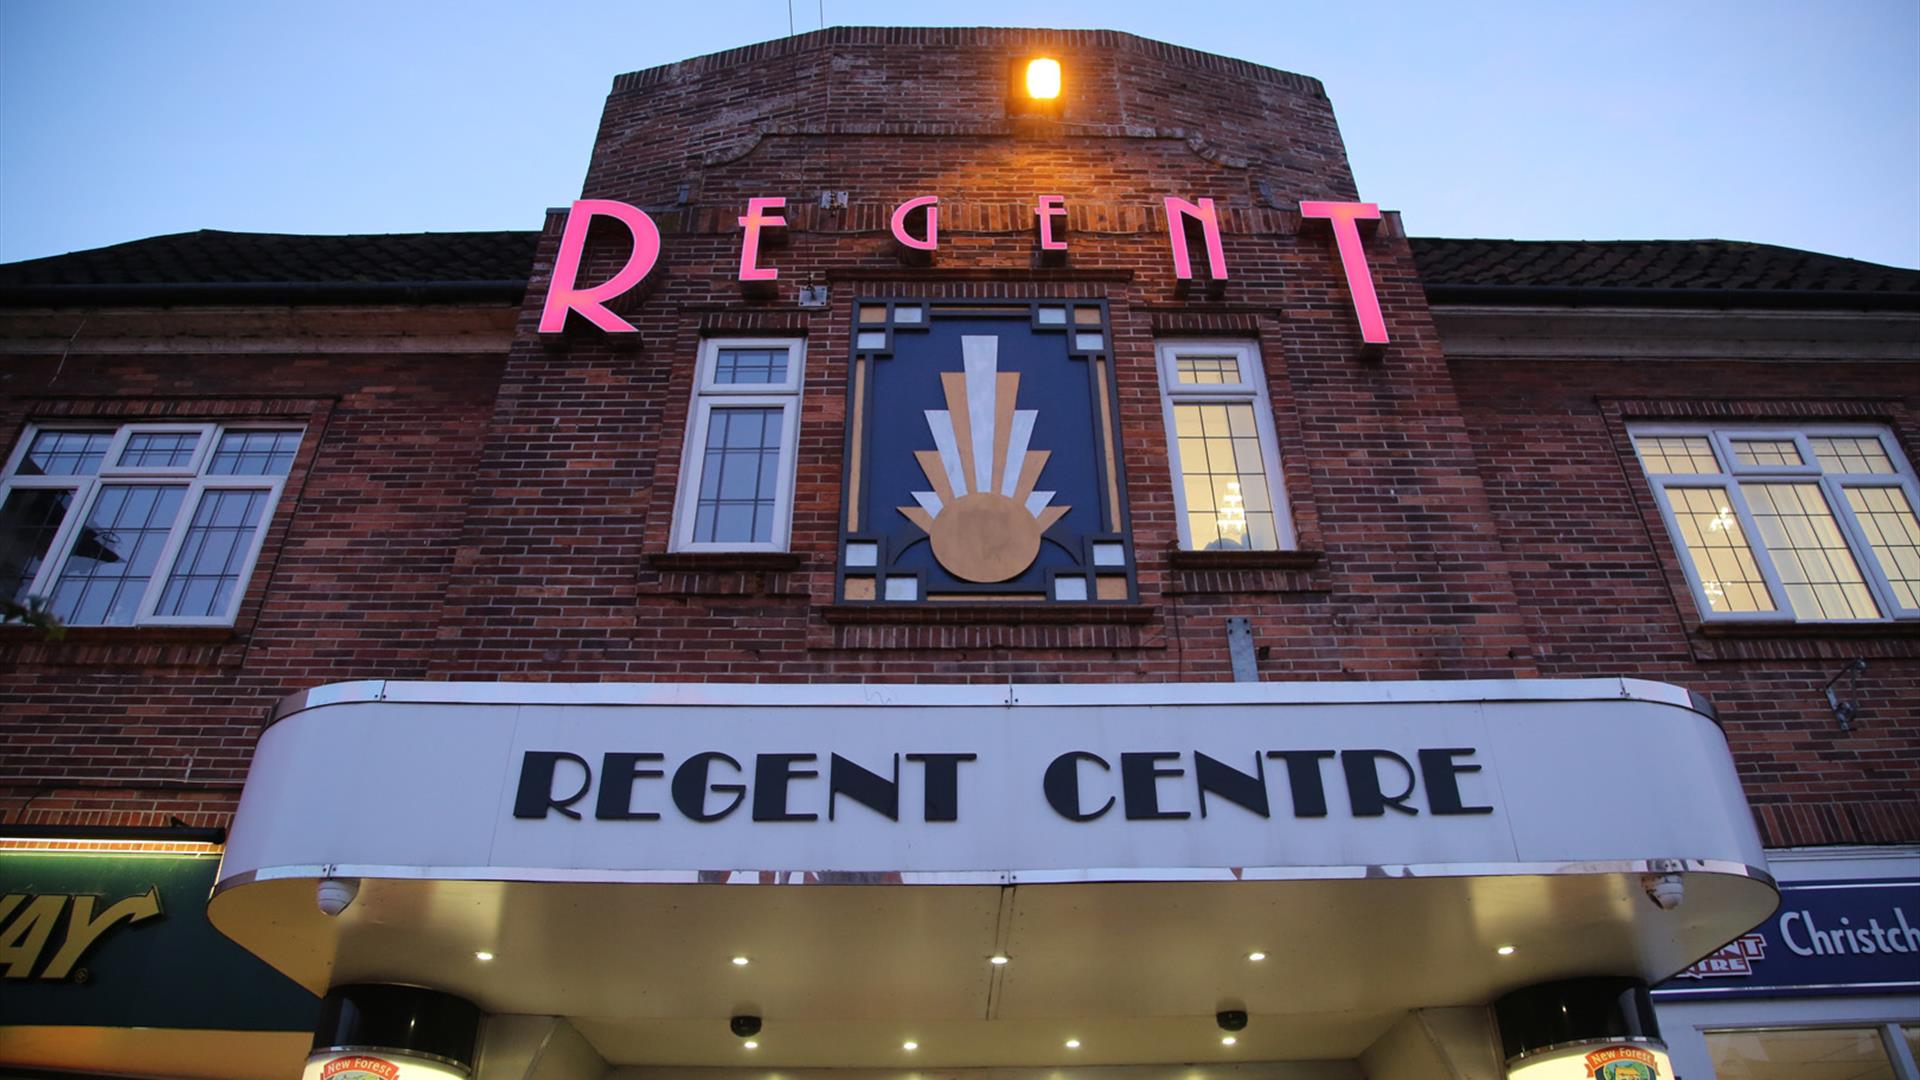 Exterior shot of the regent centre theatre in Christchurch